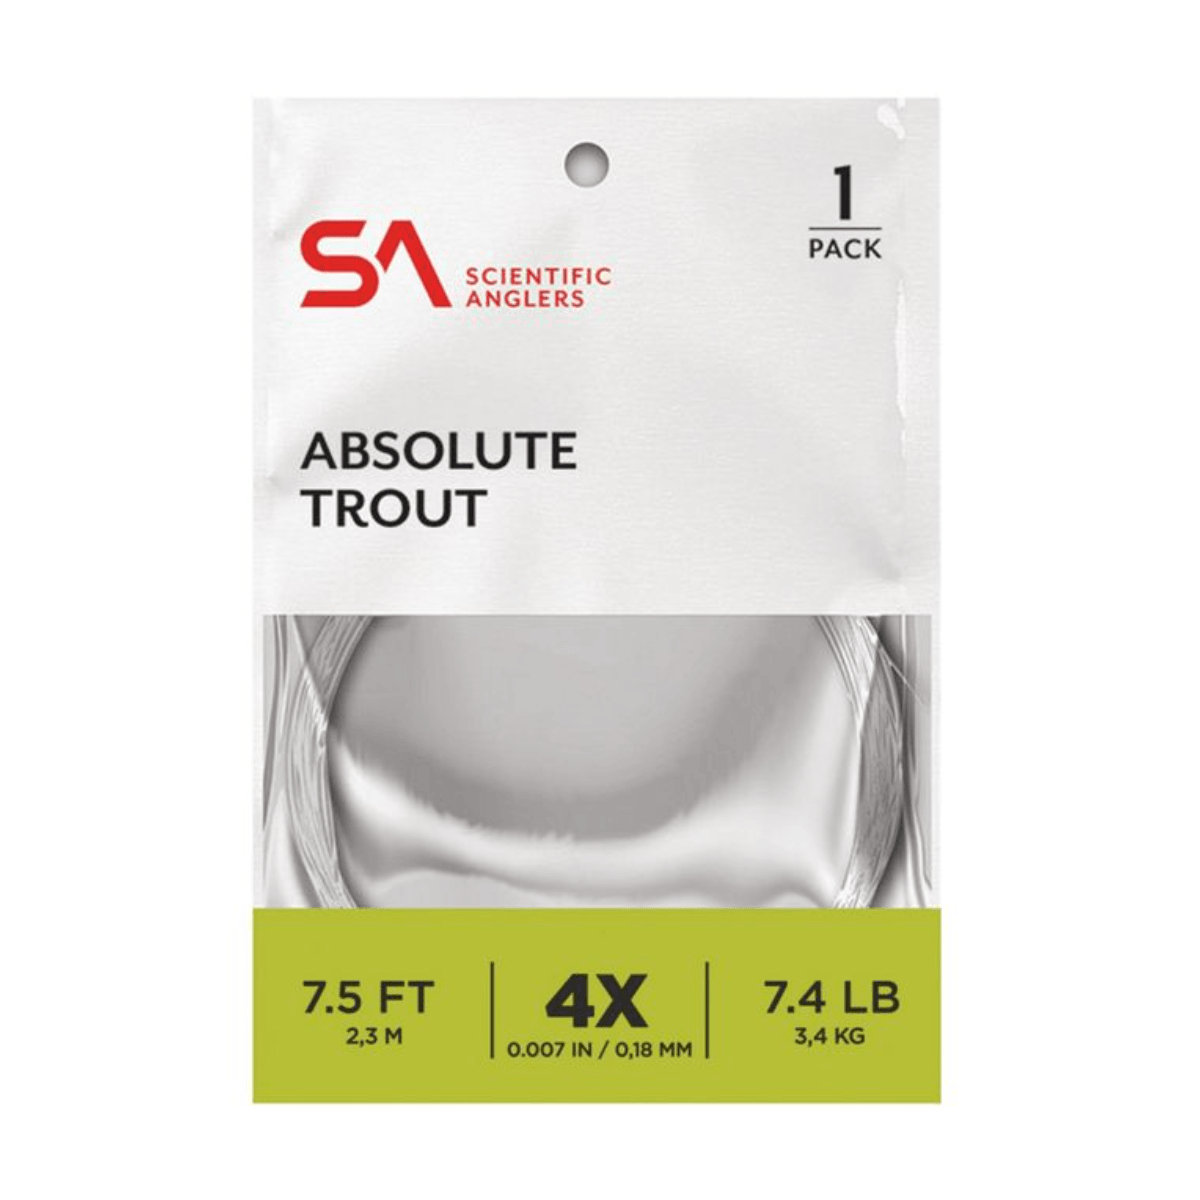 Scientific Anglers Absolute Trout (1 Pack) - Als.com